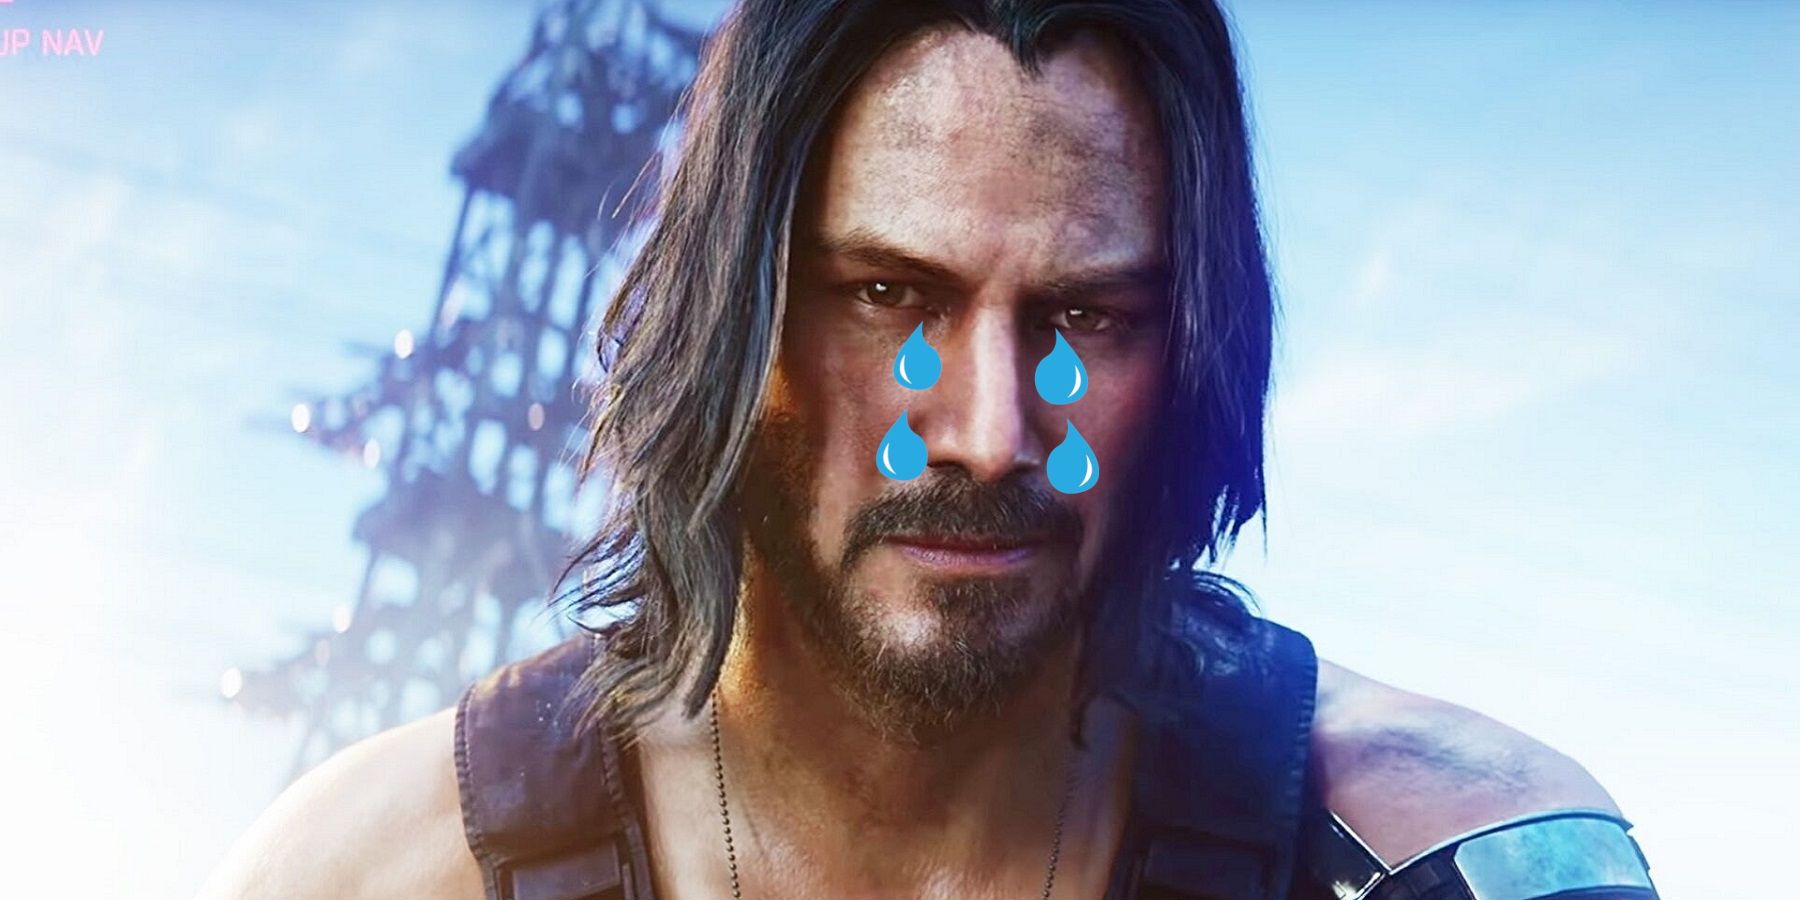 Image of Johnny Silverhand from Cyberpunk 2077, only with tears coming out of his eyes.